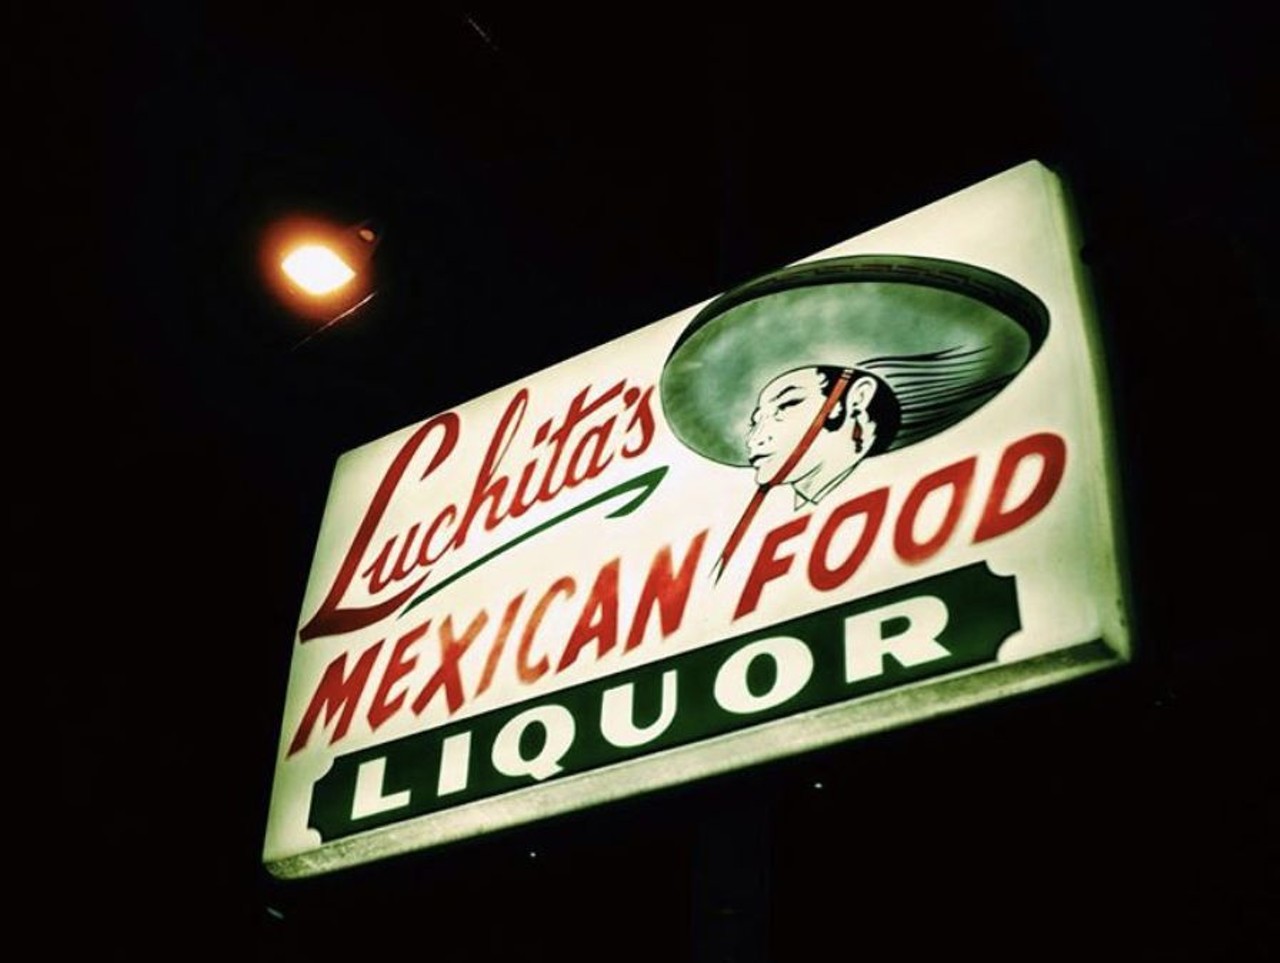  Luchita&#146;s
3456 West 117th St., Cleveland
One of the oldest Mexican joints in town, this place has been serving up food from south of the border since 1982. If you like spicy, their Burro de Tabasco is the way to go. Filled with steak, white rice, black beans, cactus, potatoes, chile chipotle, chile ancho, salsa tomatillo, it has the perfect mix of spice and flavor to be one of our favorite burritos in town.
Photo via @ScottBeNimble/Instagram